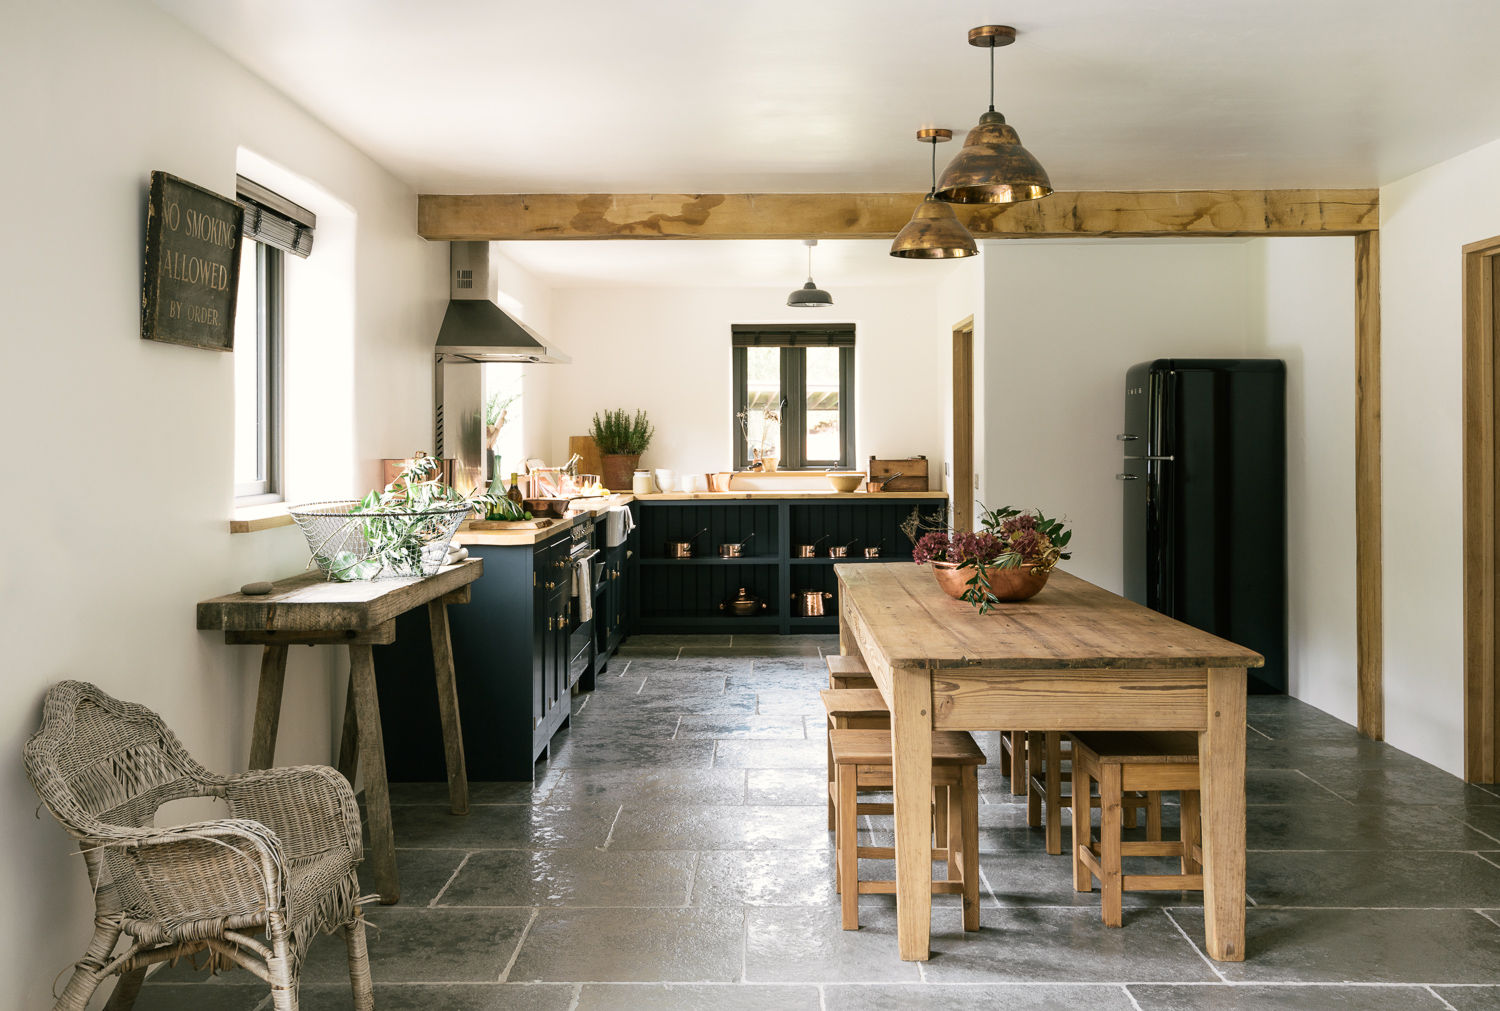 The Leicestershire Kitchen in the Woods by deVOL deVOL Kitchens Cozinhas campestres